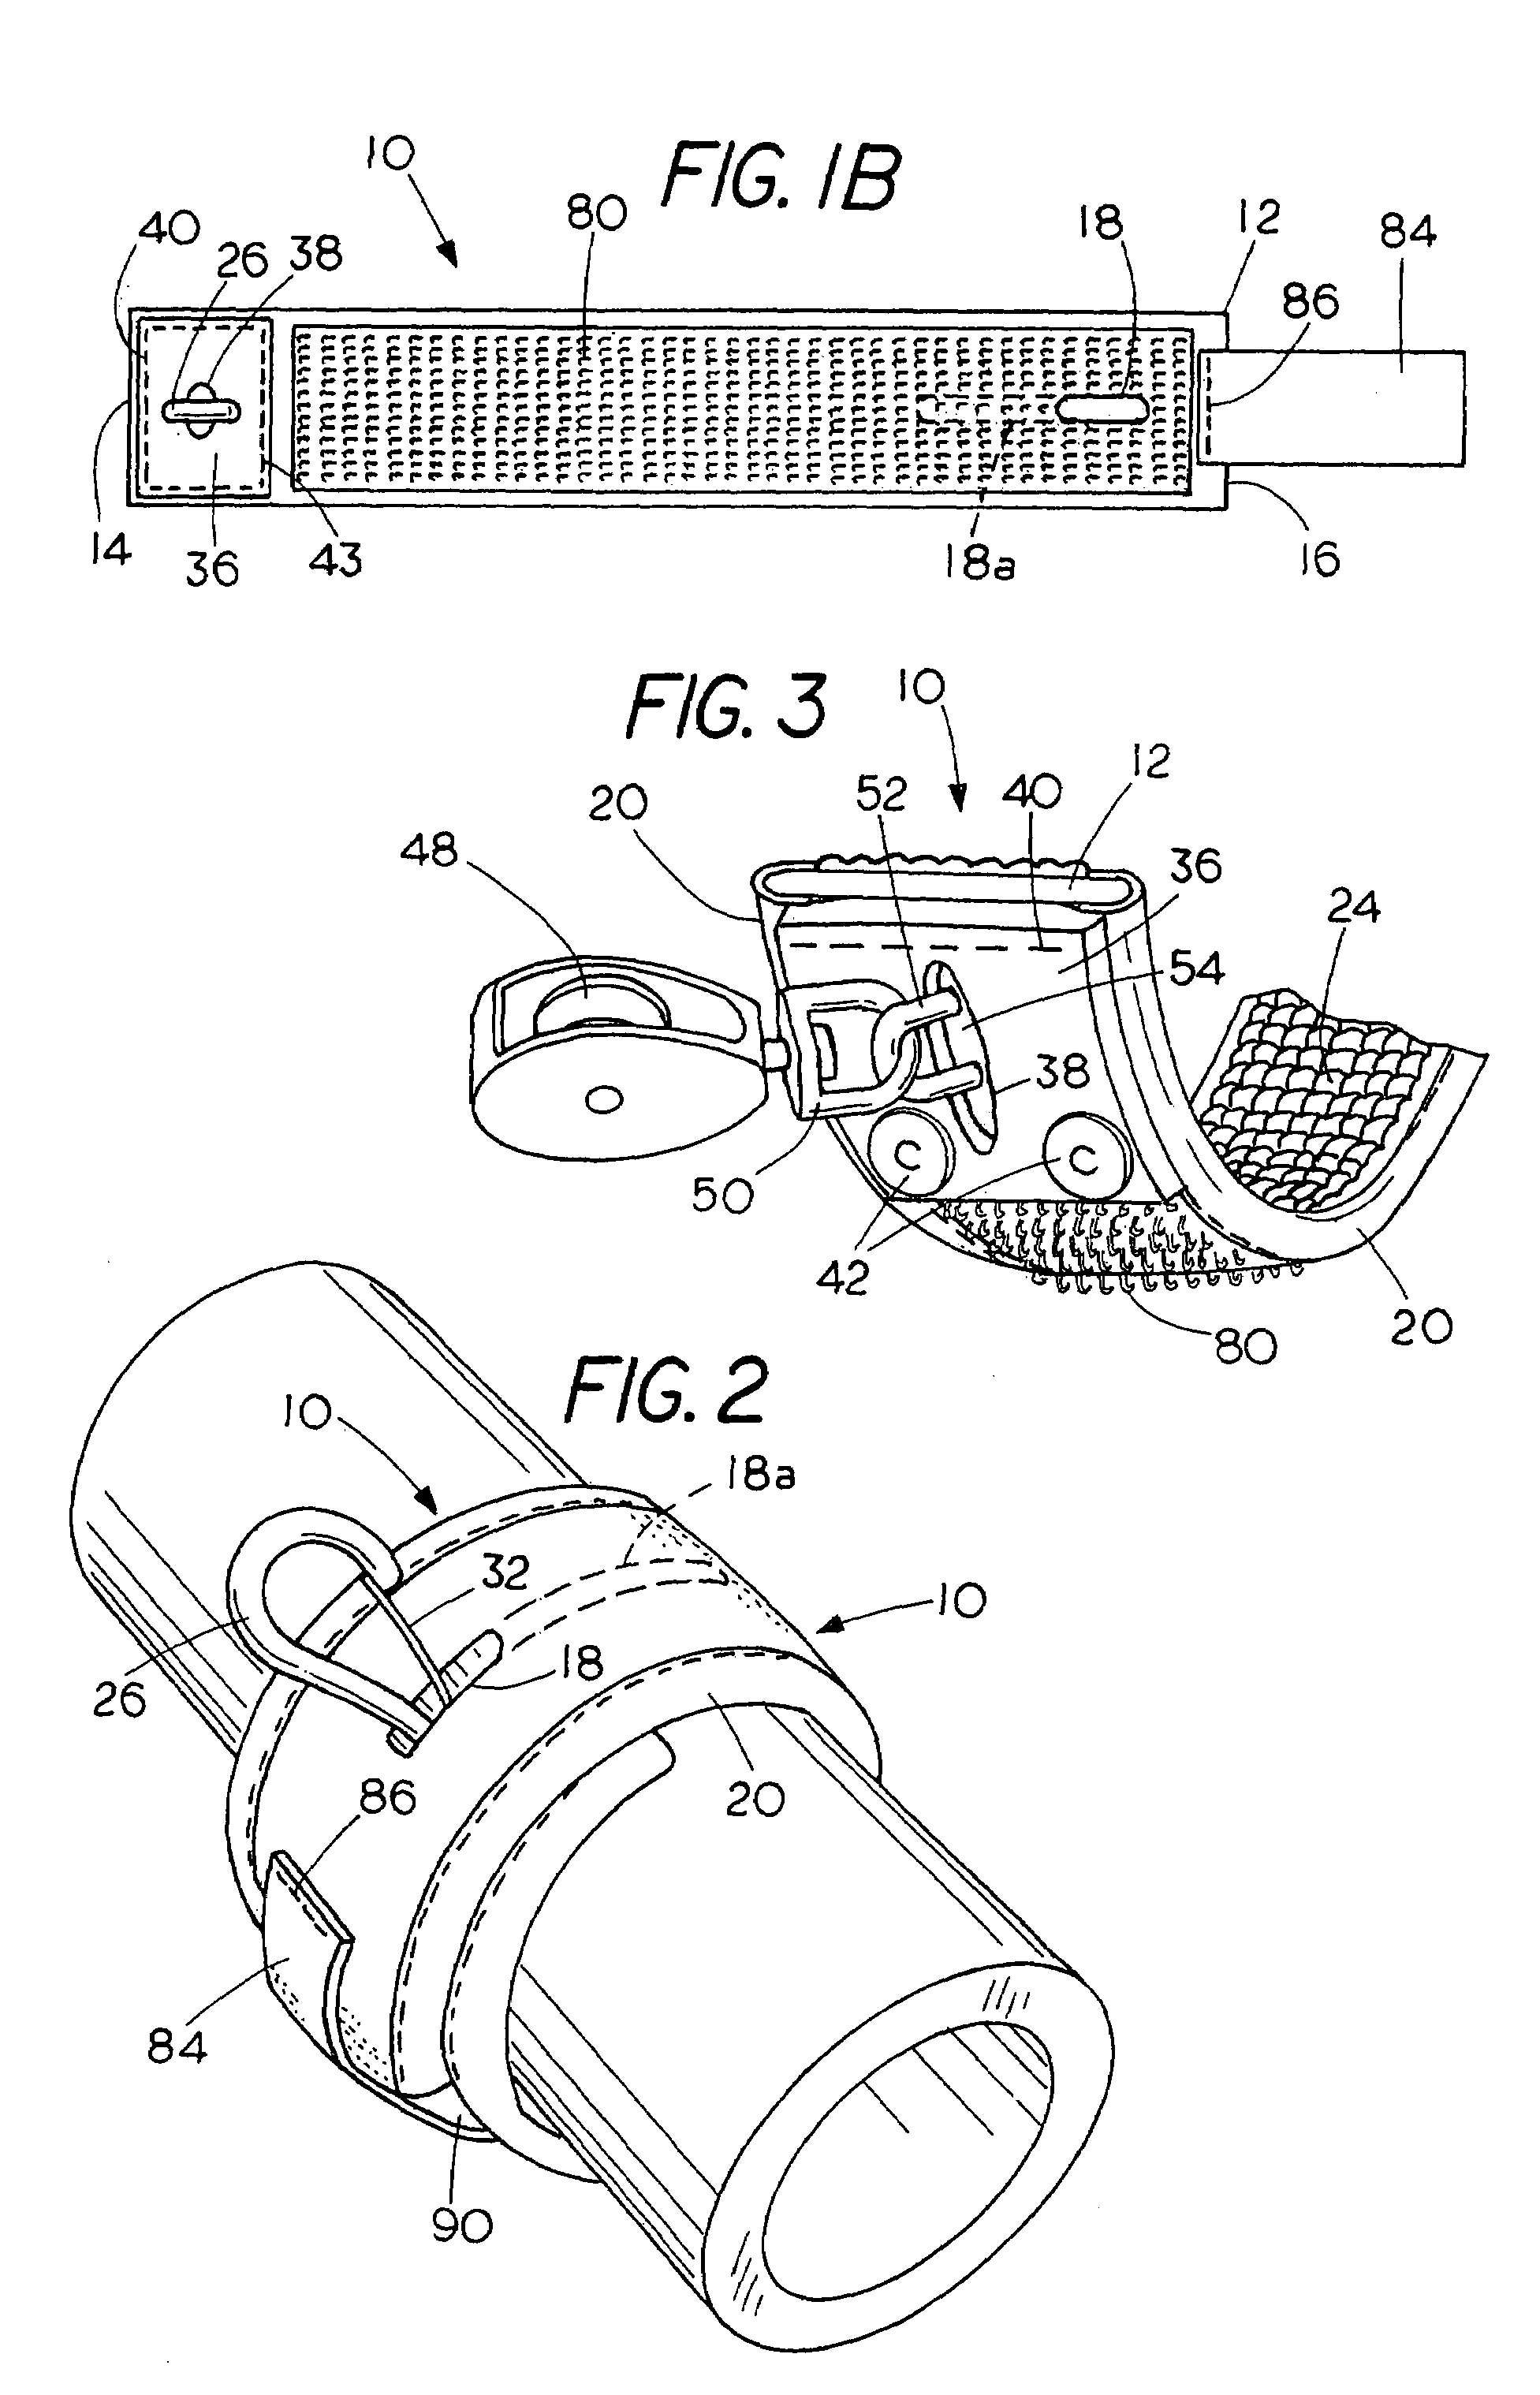 Tie-down wrap device for securing articles for shipment